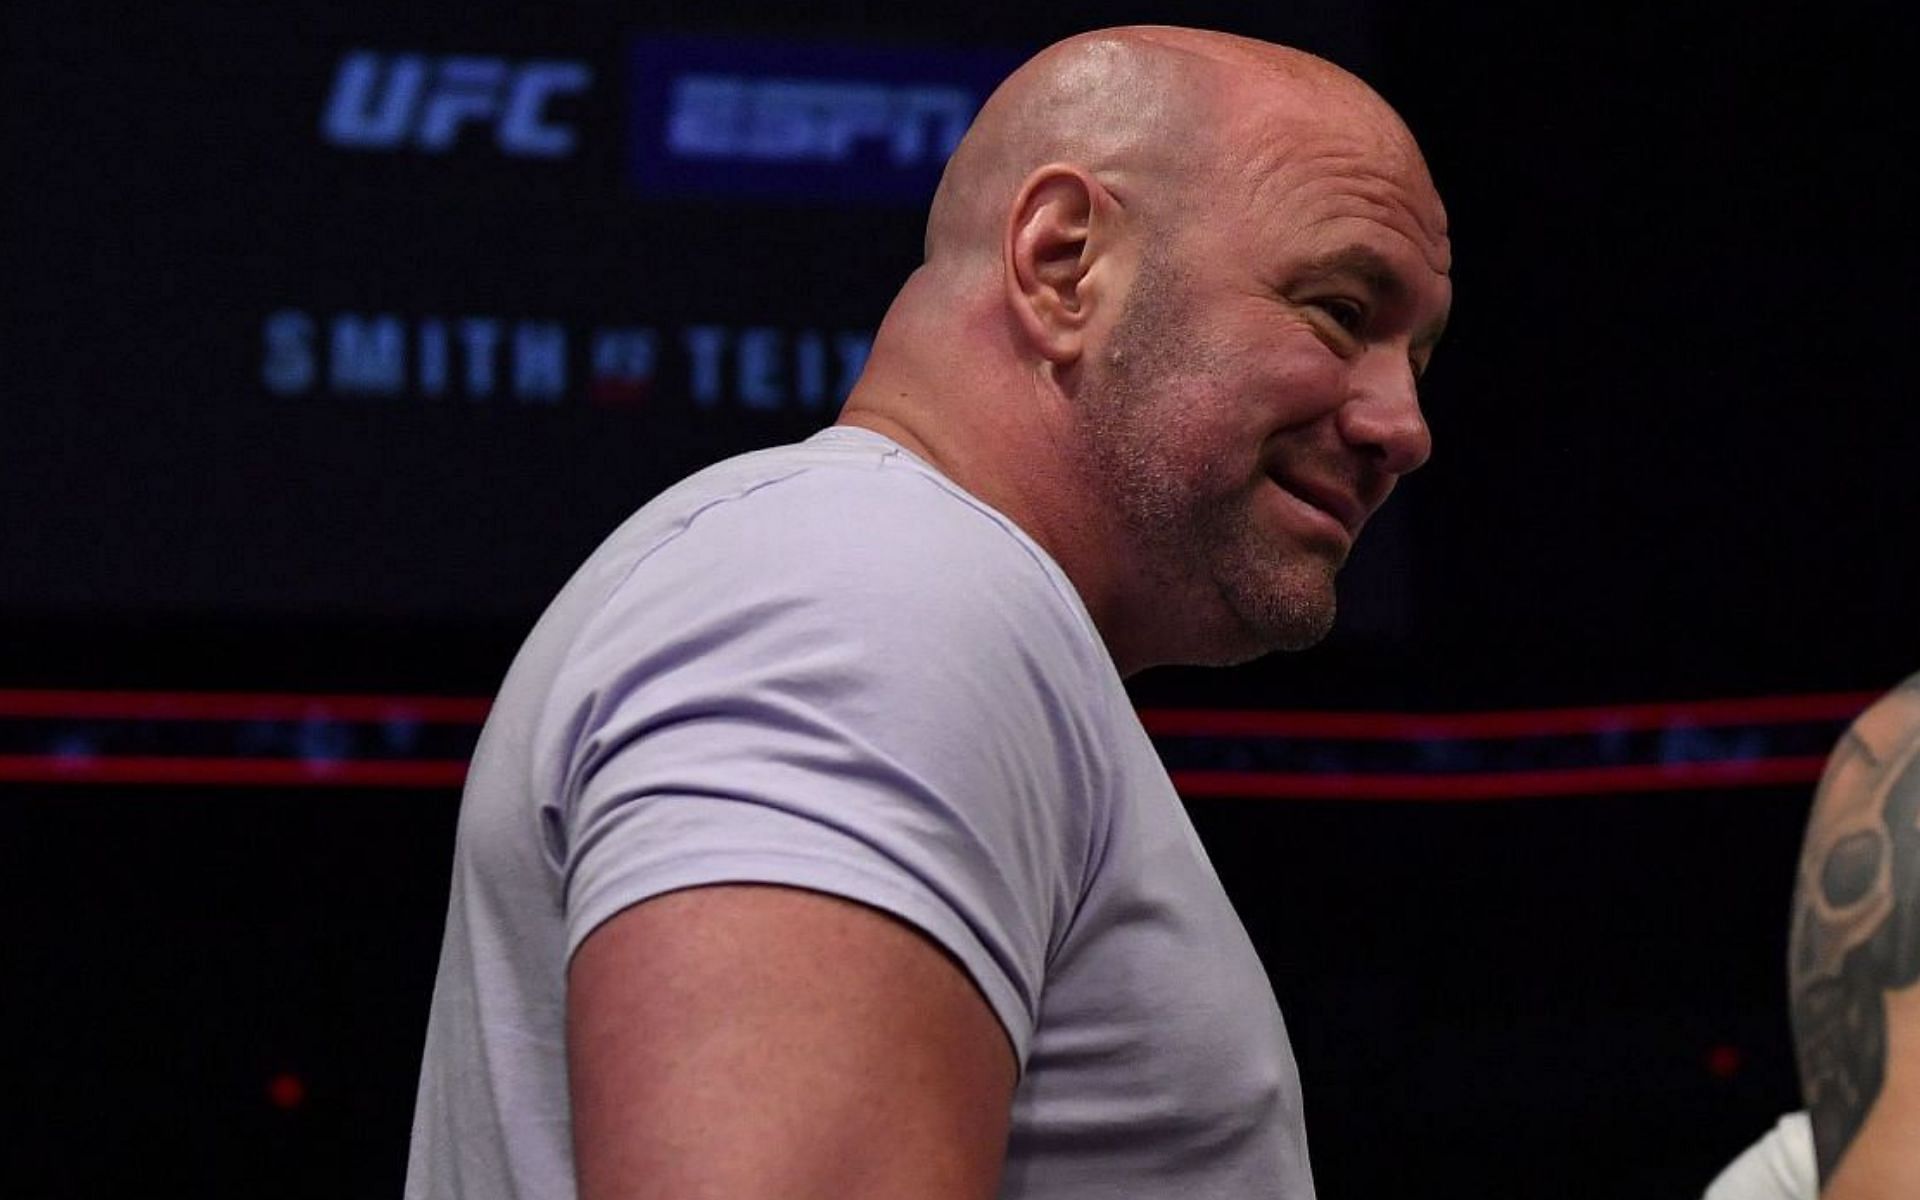 Dana White talks about coming through a PAL program in his youth